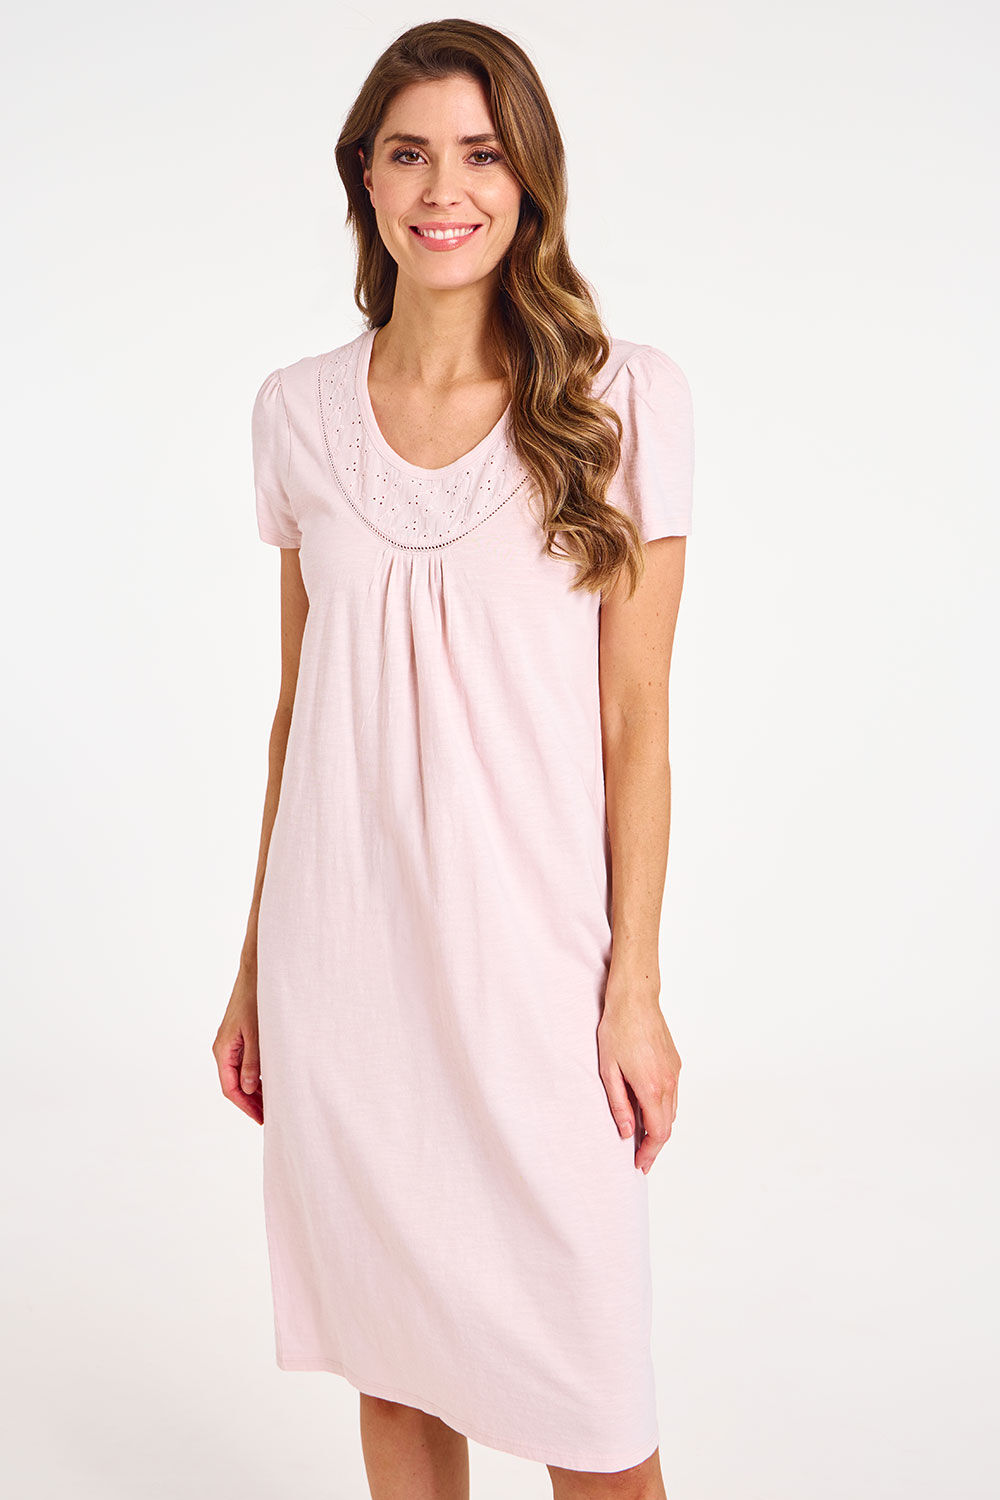 Bonmarche Pink Short Sleeve Broderie and Jersey Nightdress, Size: 14